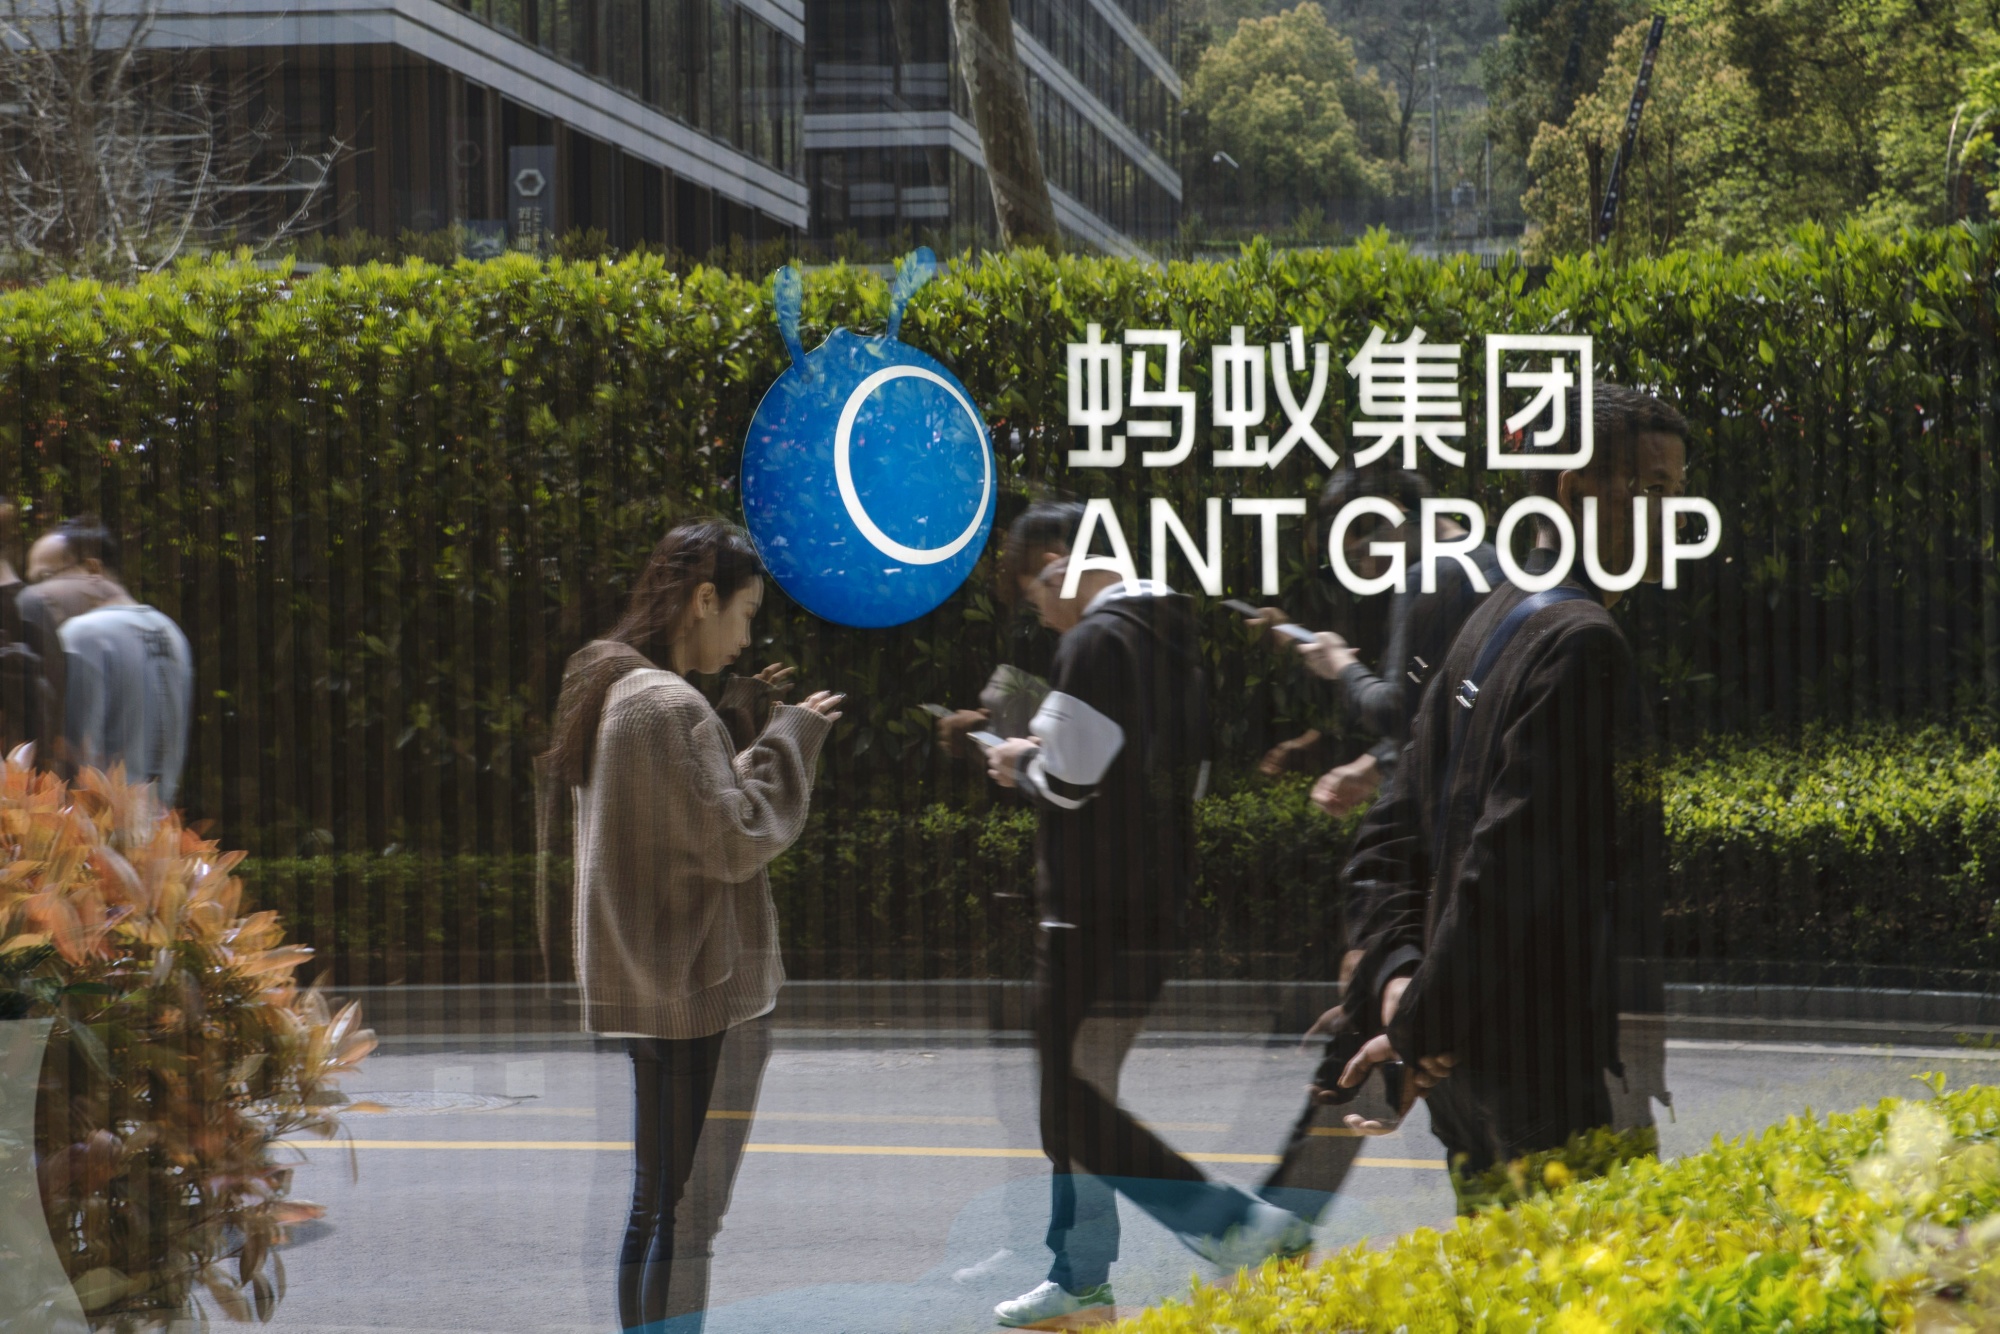 Ant-Backed Hello Seeking Funds at Likely Lower Valuation - Bloomberg